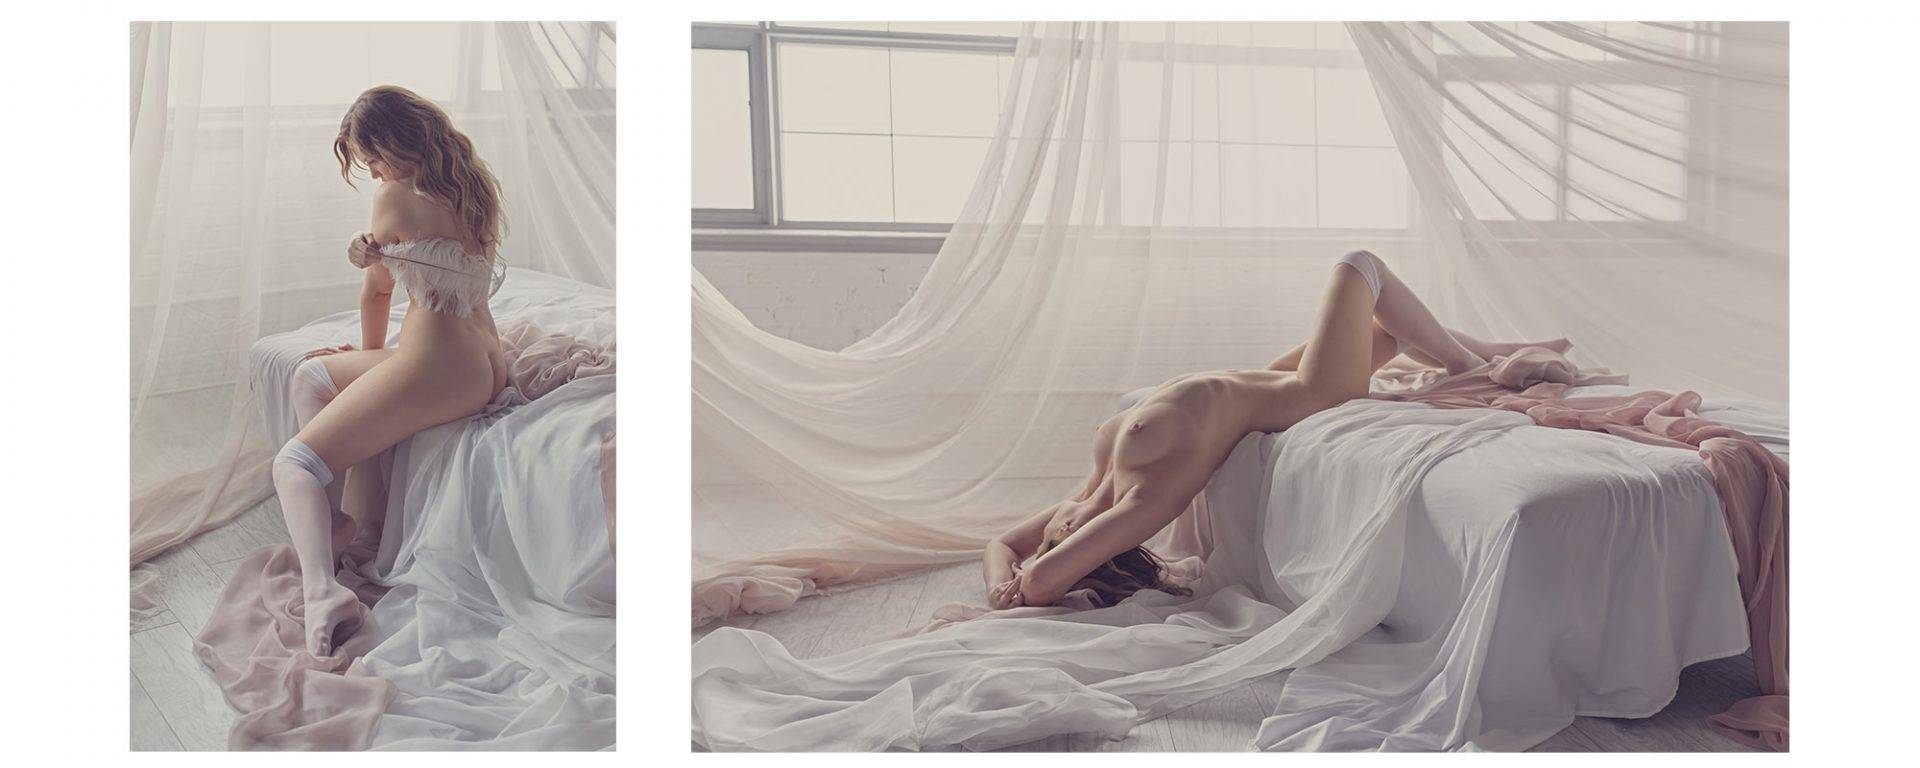 Artistic nude photos of a woman on bed